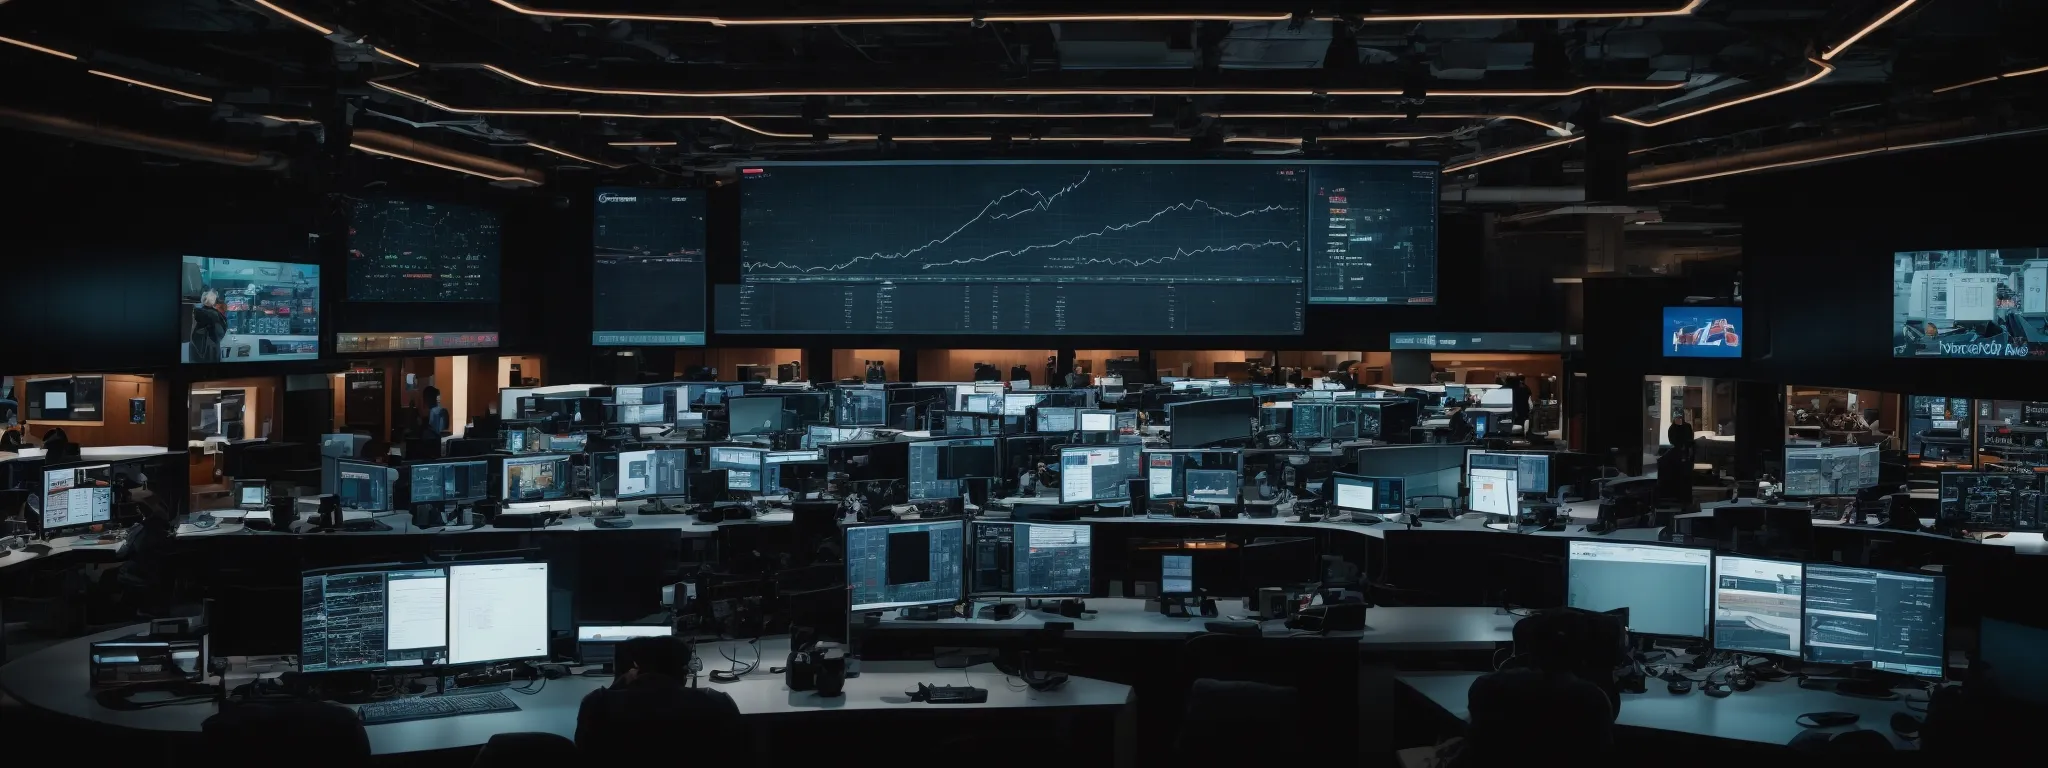 a wide-open command center with multiple large screens displaying graphs, social media feeds, and analytics dashboards.